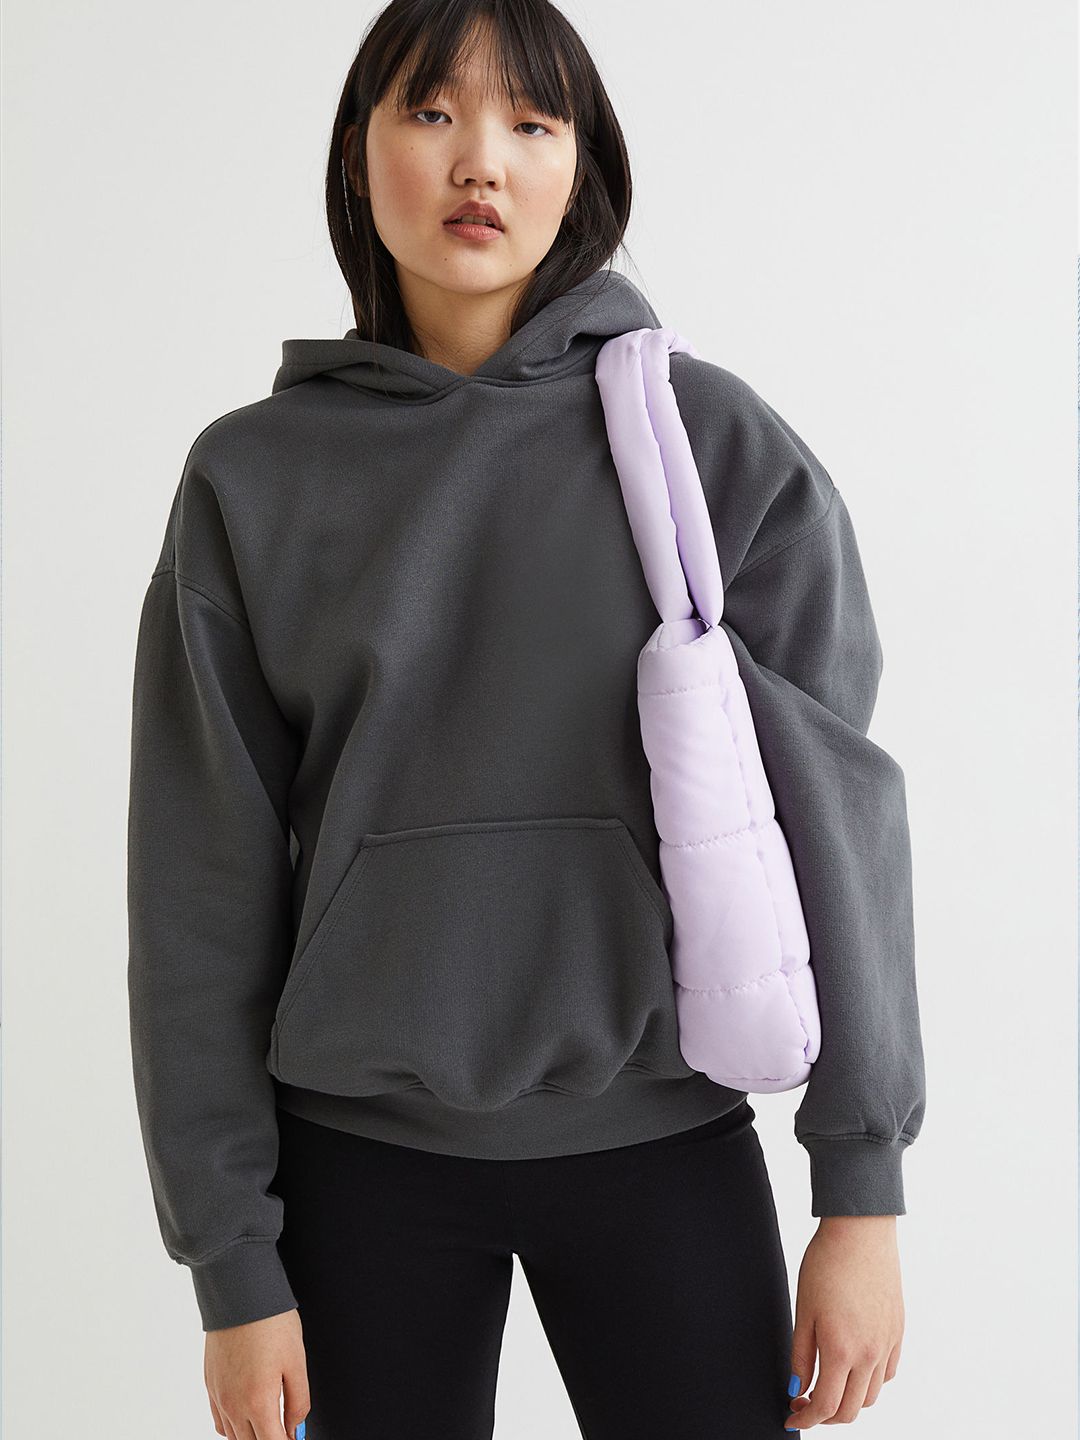 H&M Woman Grey Hoodie Price in India